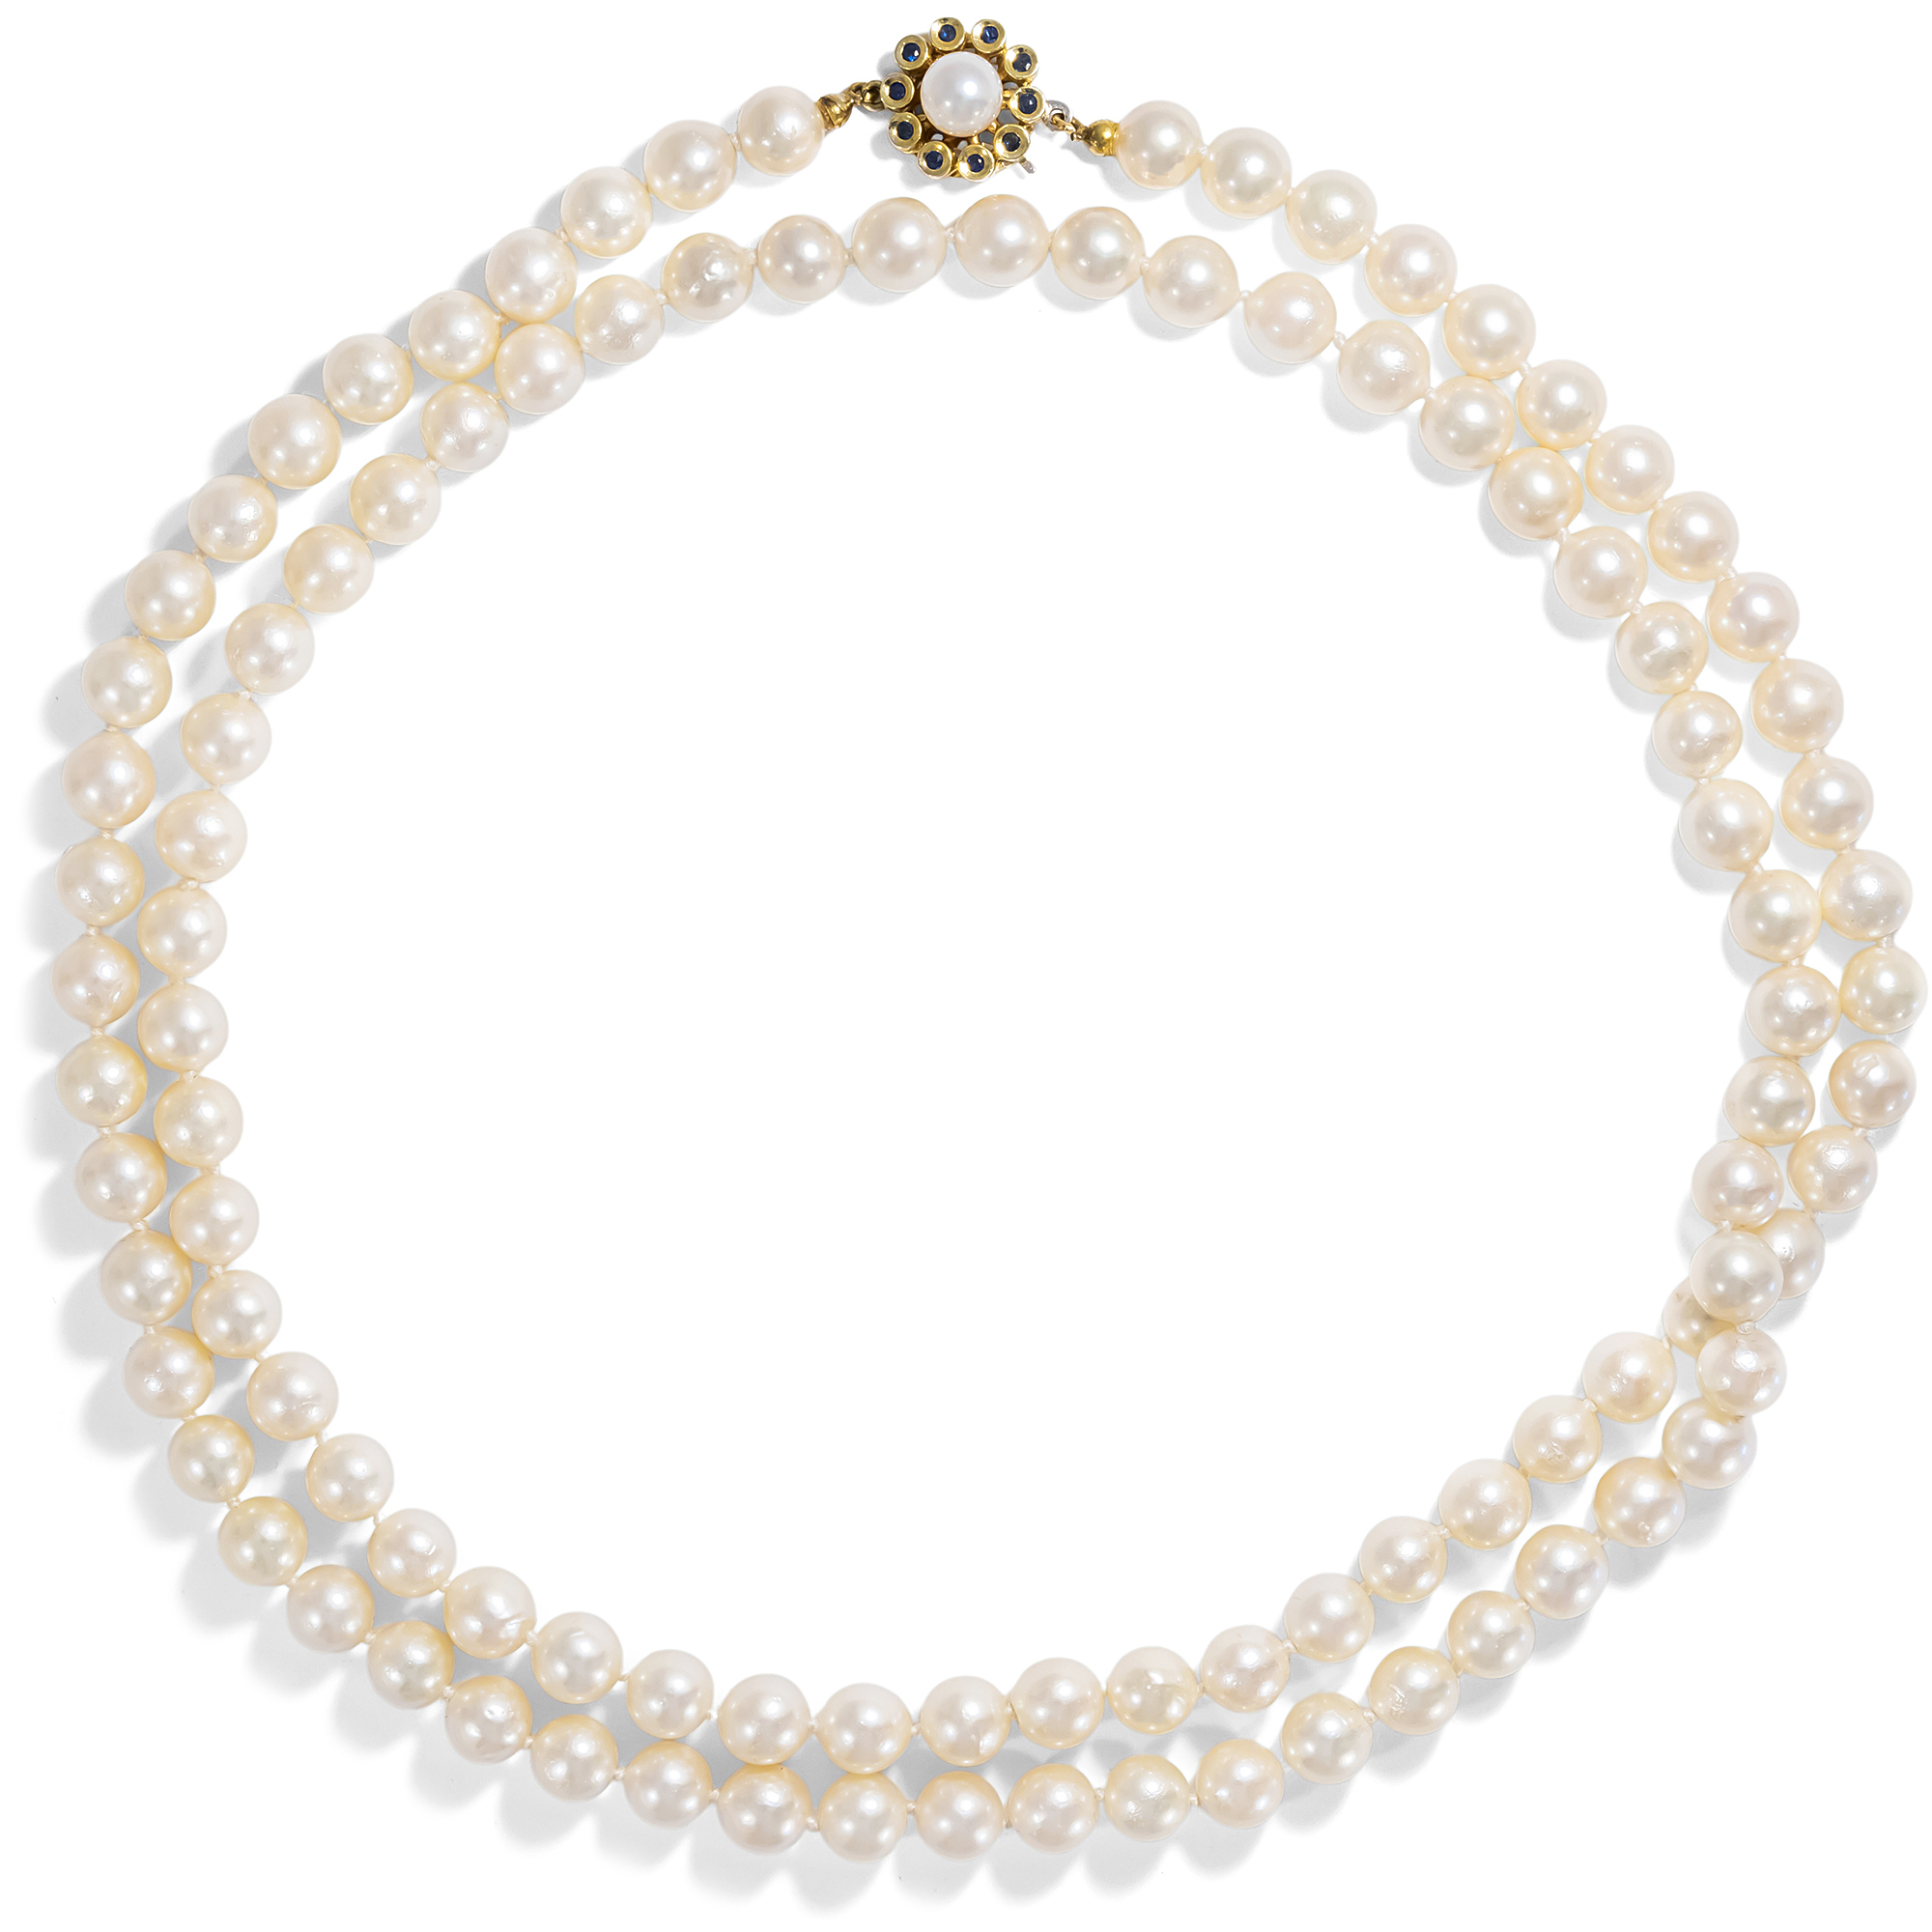 Victorian Beaded Pearl Necklace